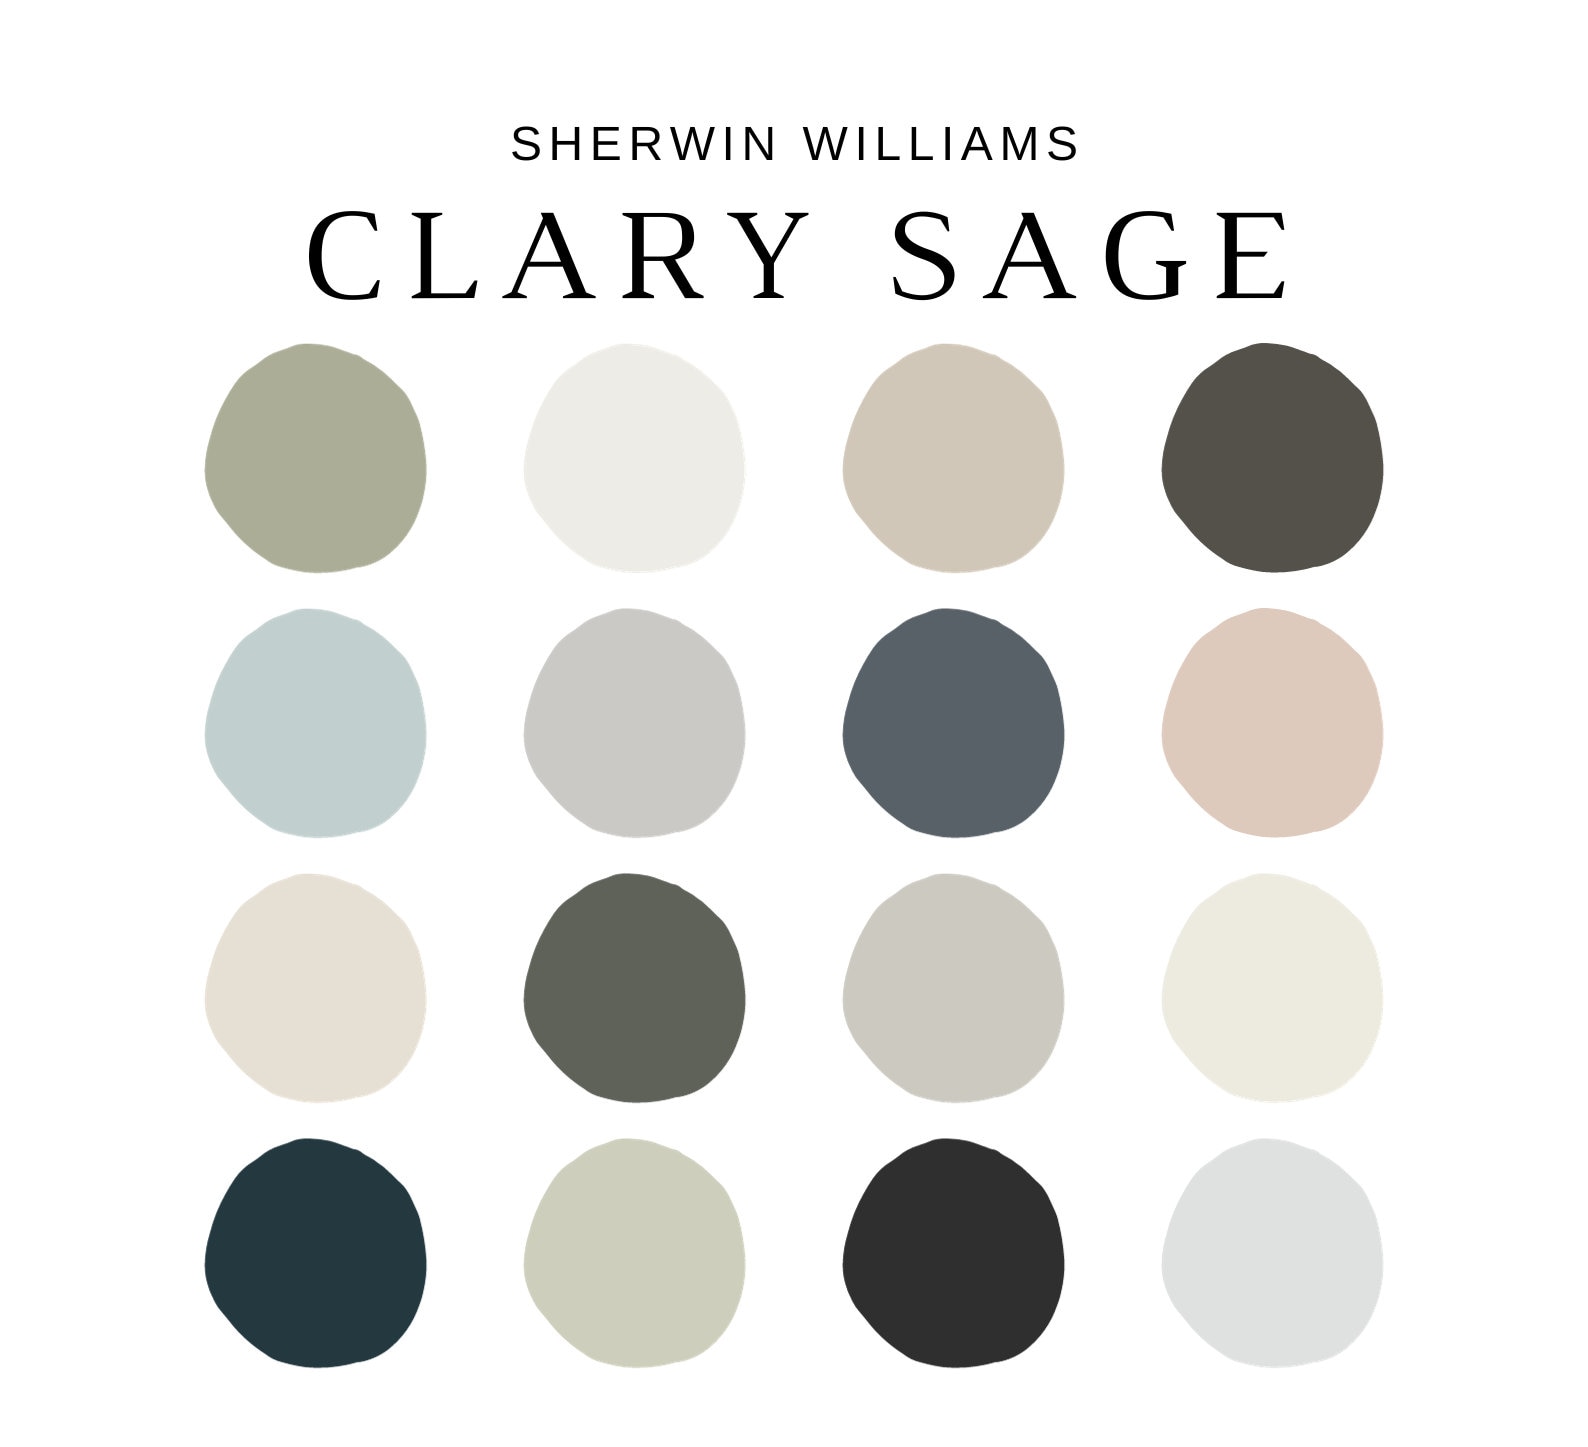 Sherwin Williams Clary Sage Palette, Complementary Whole House